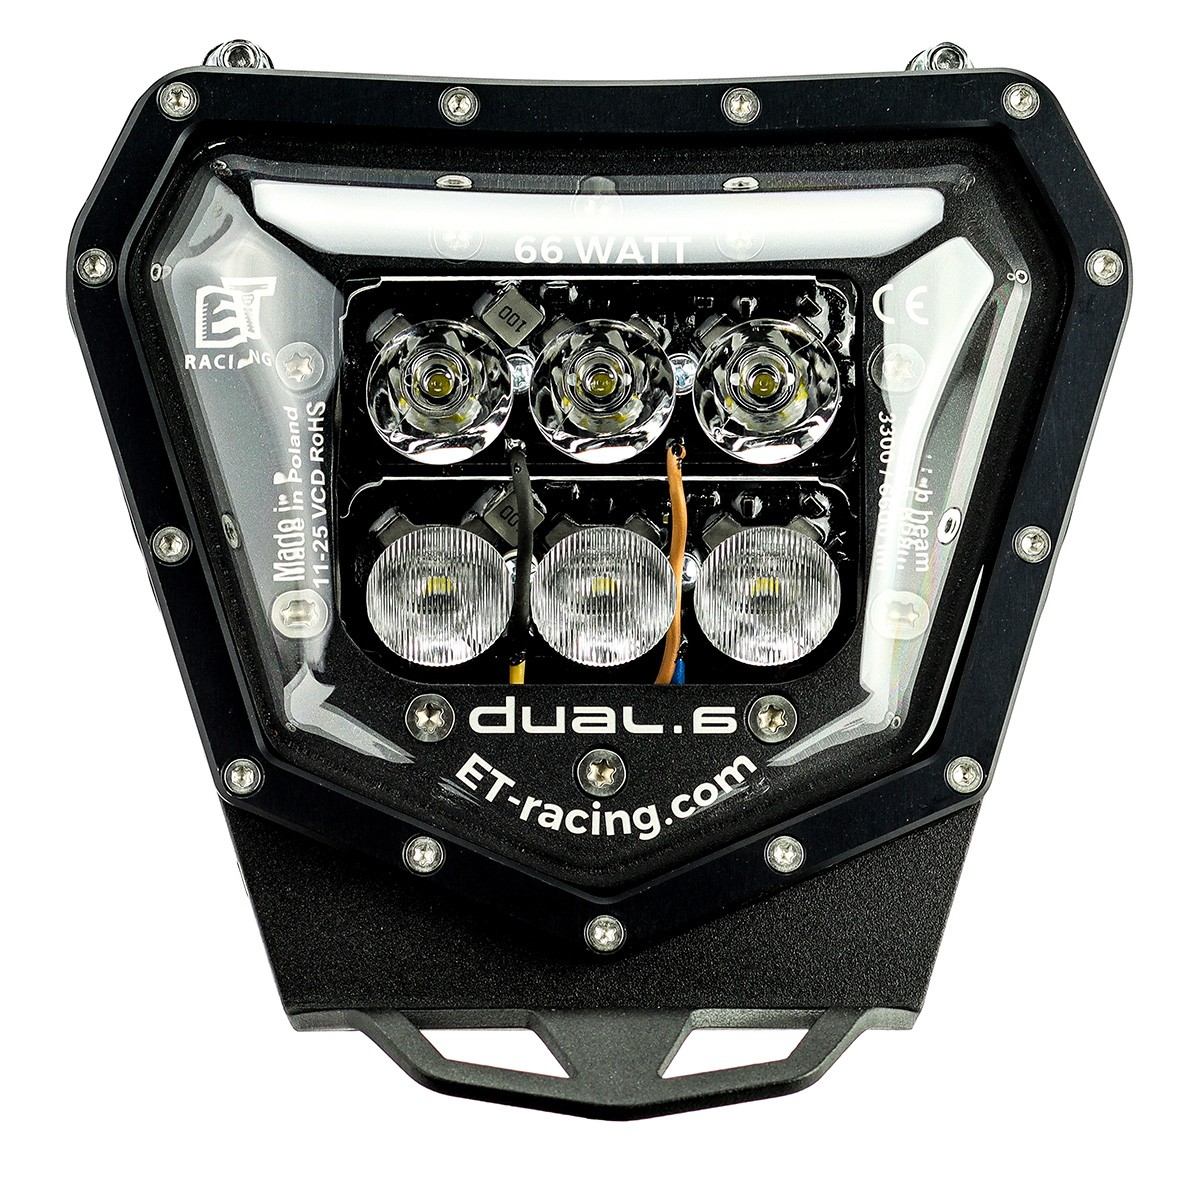 【GAS GAS】LED lamp Headlight Dual.6 GAS GAS ES 700 / SM 700 only FUEL INJECTION engine